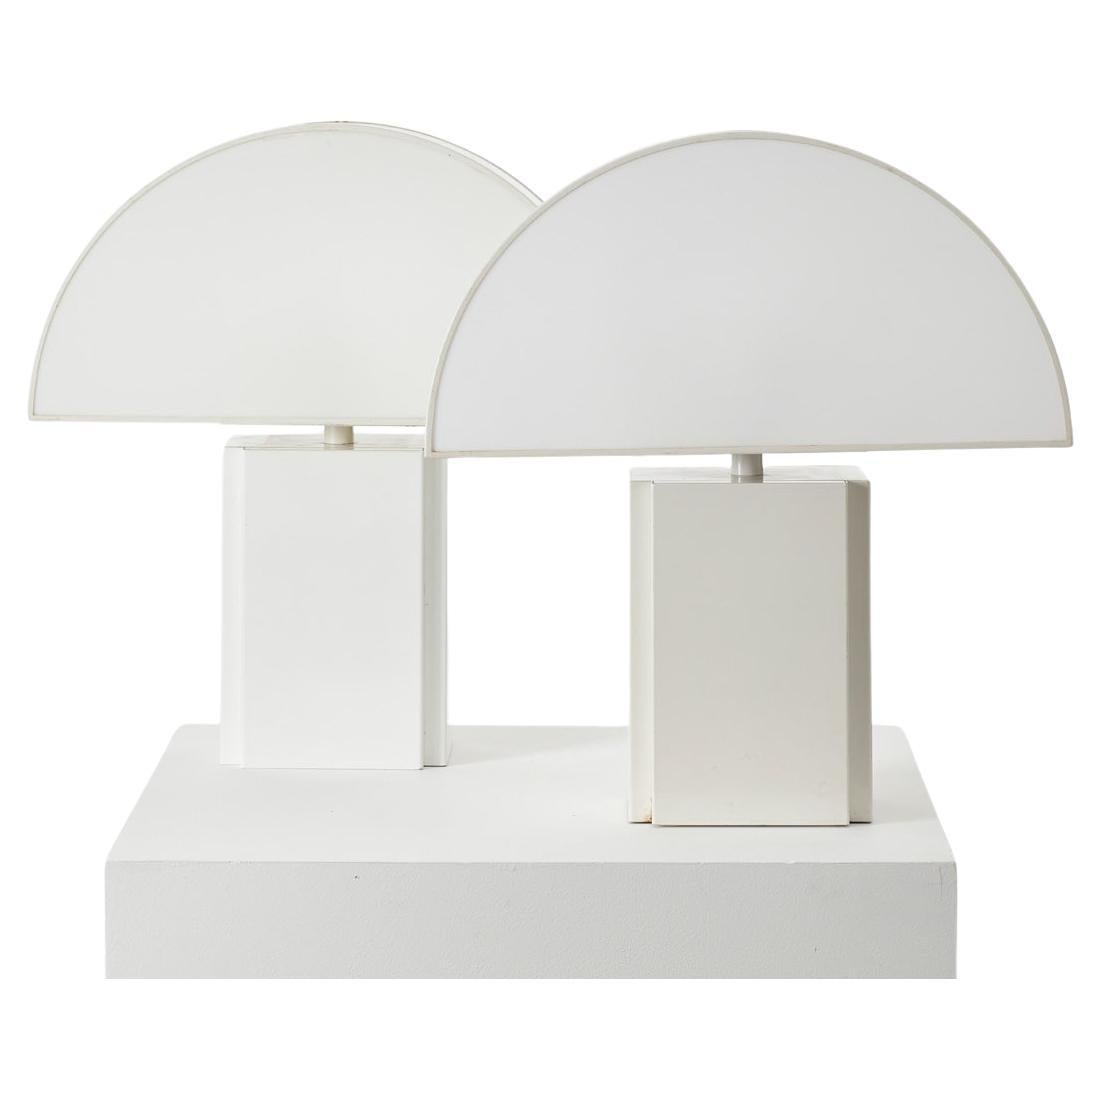 Pair of Harvey Guzzini Olympe Table Lamps for ED, Italy 1970s